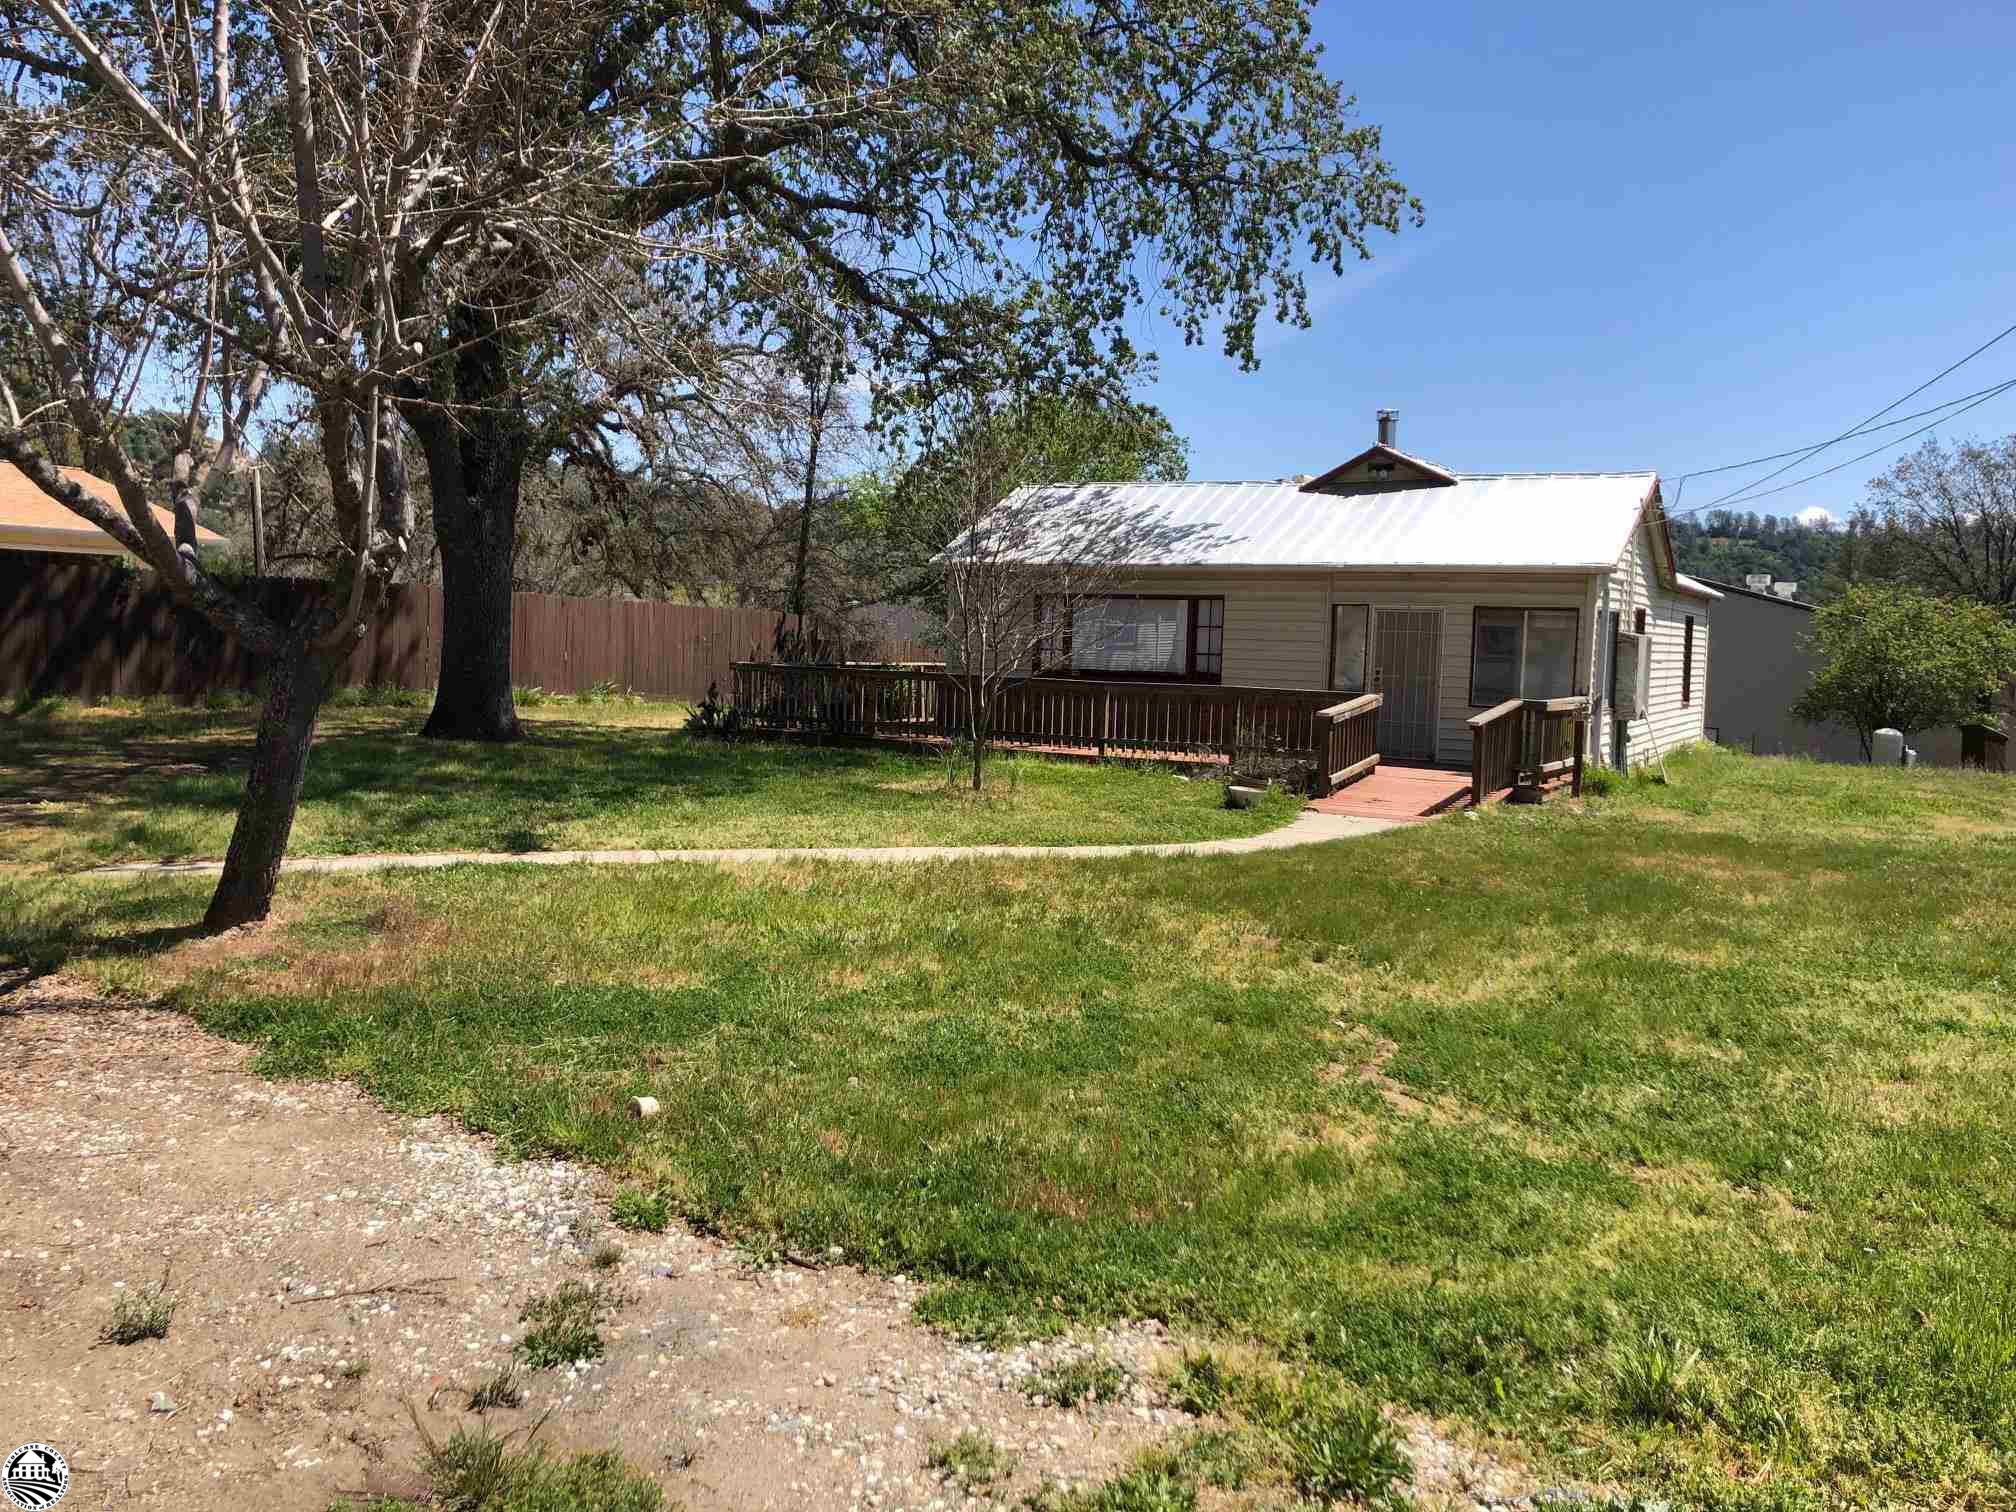 CHARMING 2 BEDROOM 2 BATH HOME ON OVER 1/2 ACER WITH SEPARATE OVERSIZED 2 CAR GARAGE. PROPERTY ZONED FOR COMMERCIAL BUSINESS IN PRIME AREA. LOTS OF OPTIONS.  HOME,  BUSINESS ,  RENTAL OR BOTH.